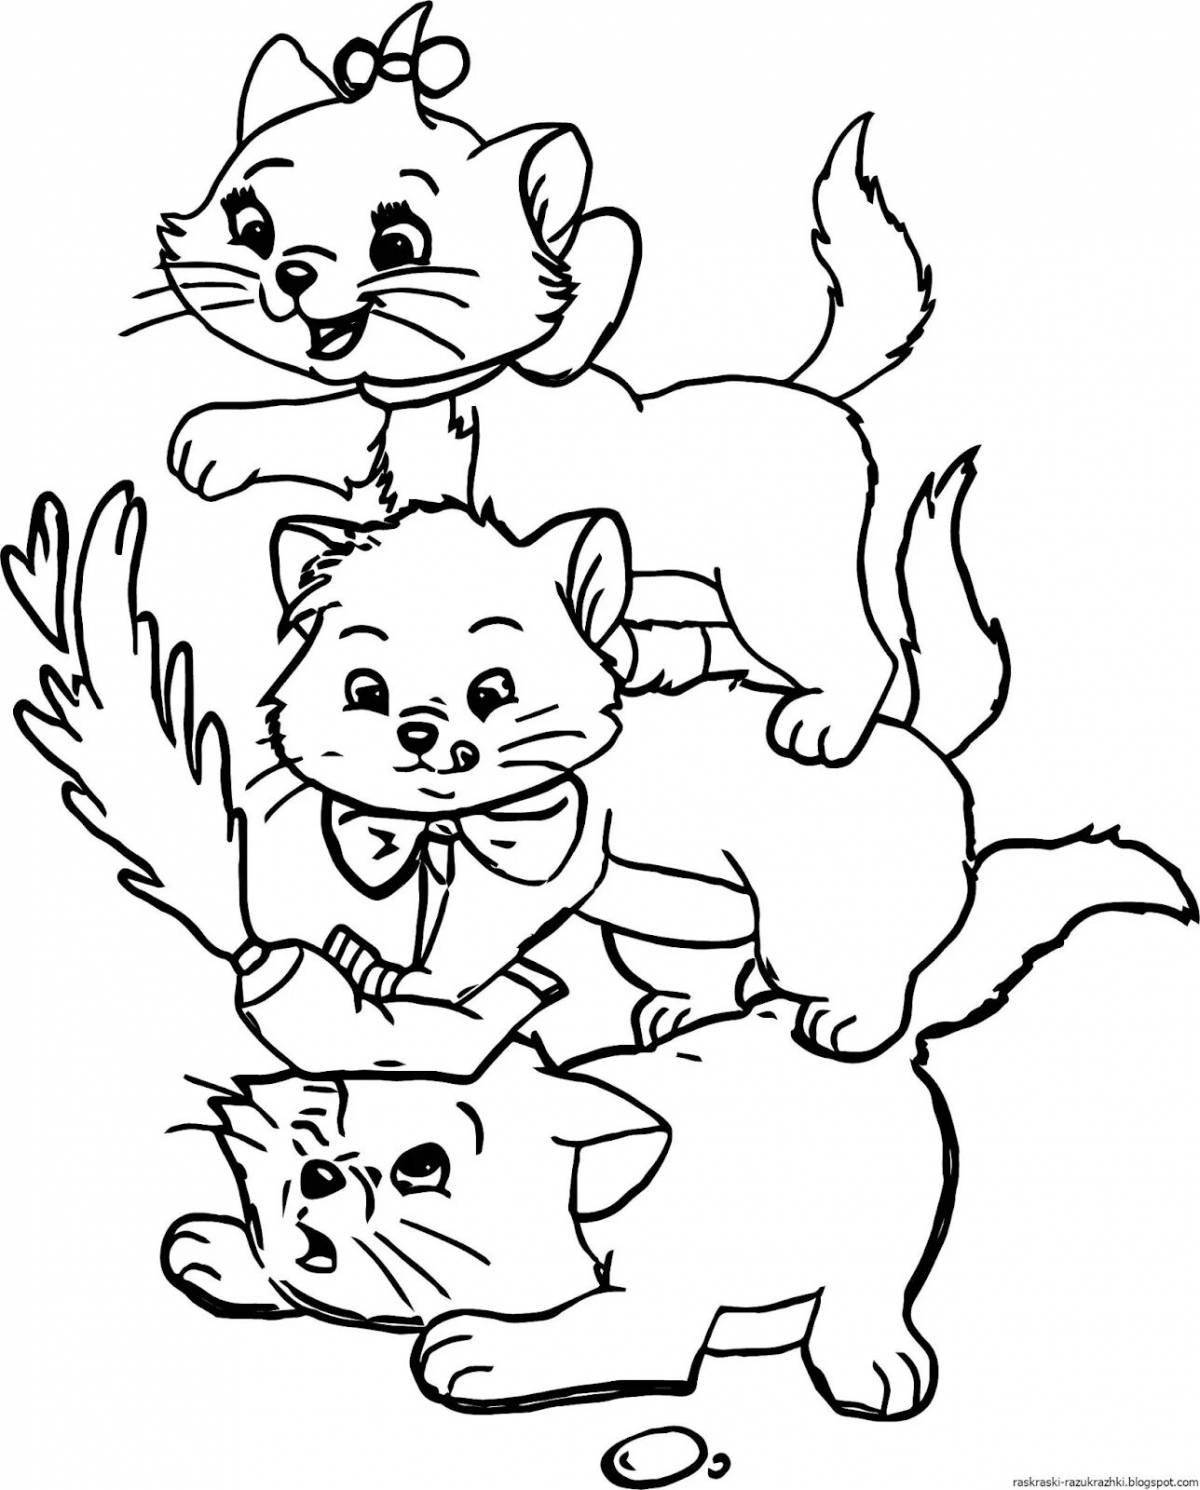 Adorable cat and dog coloring pages for kids